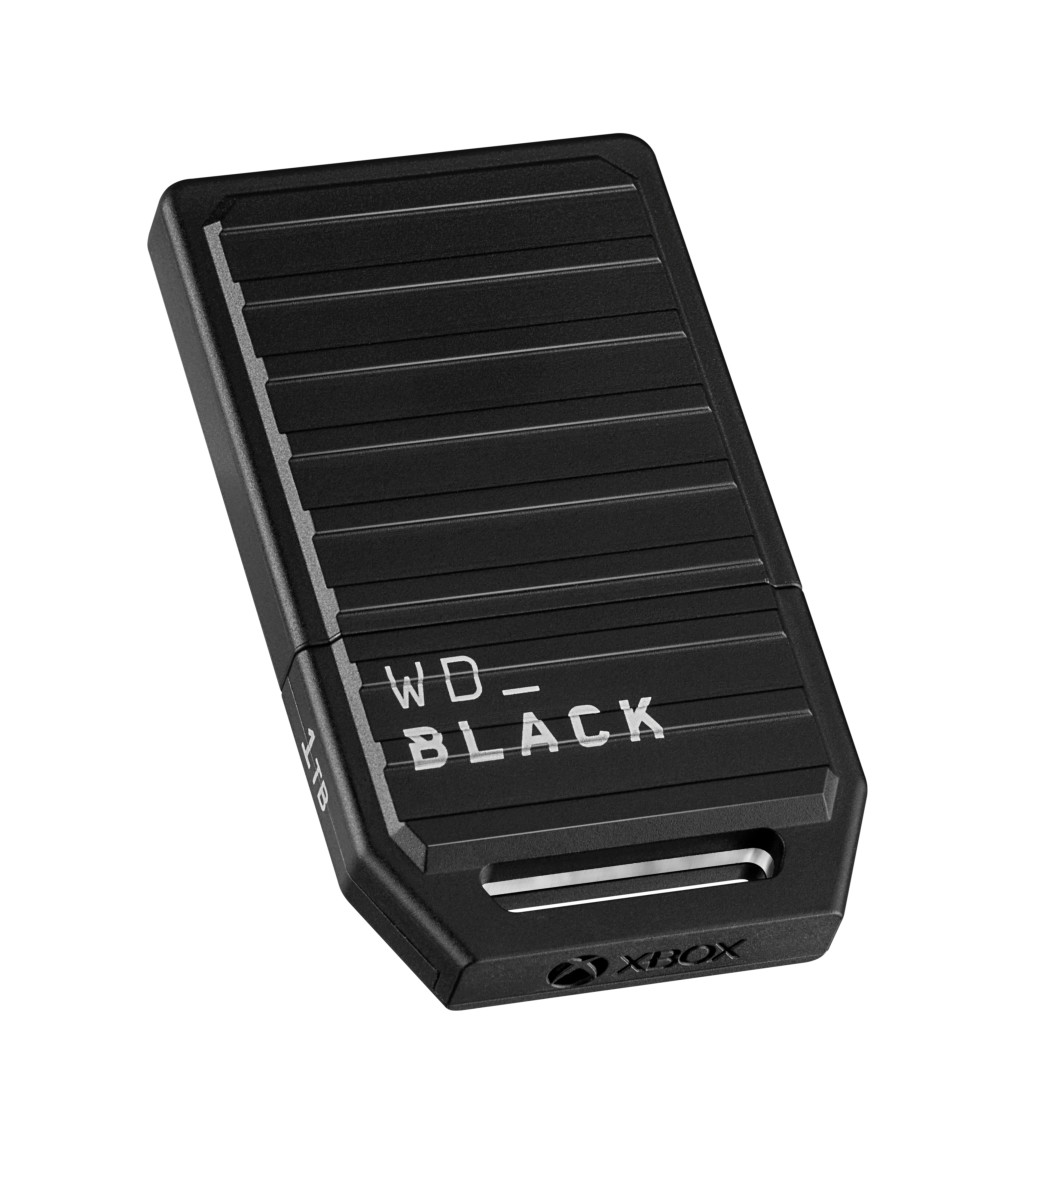 Ext SSD 1TB WD_BLACK C50 Expansion Xbox